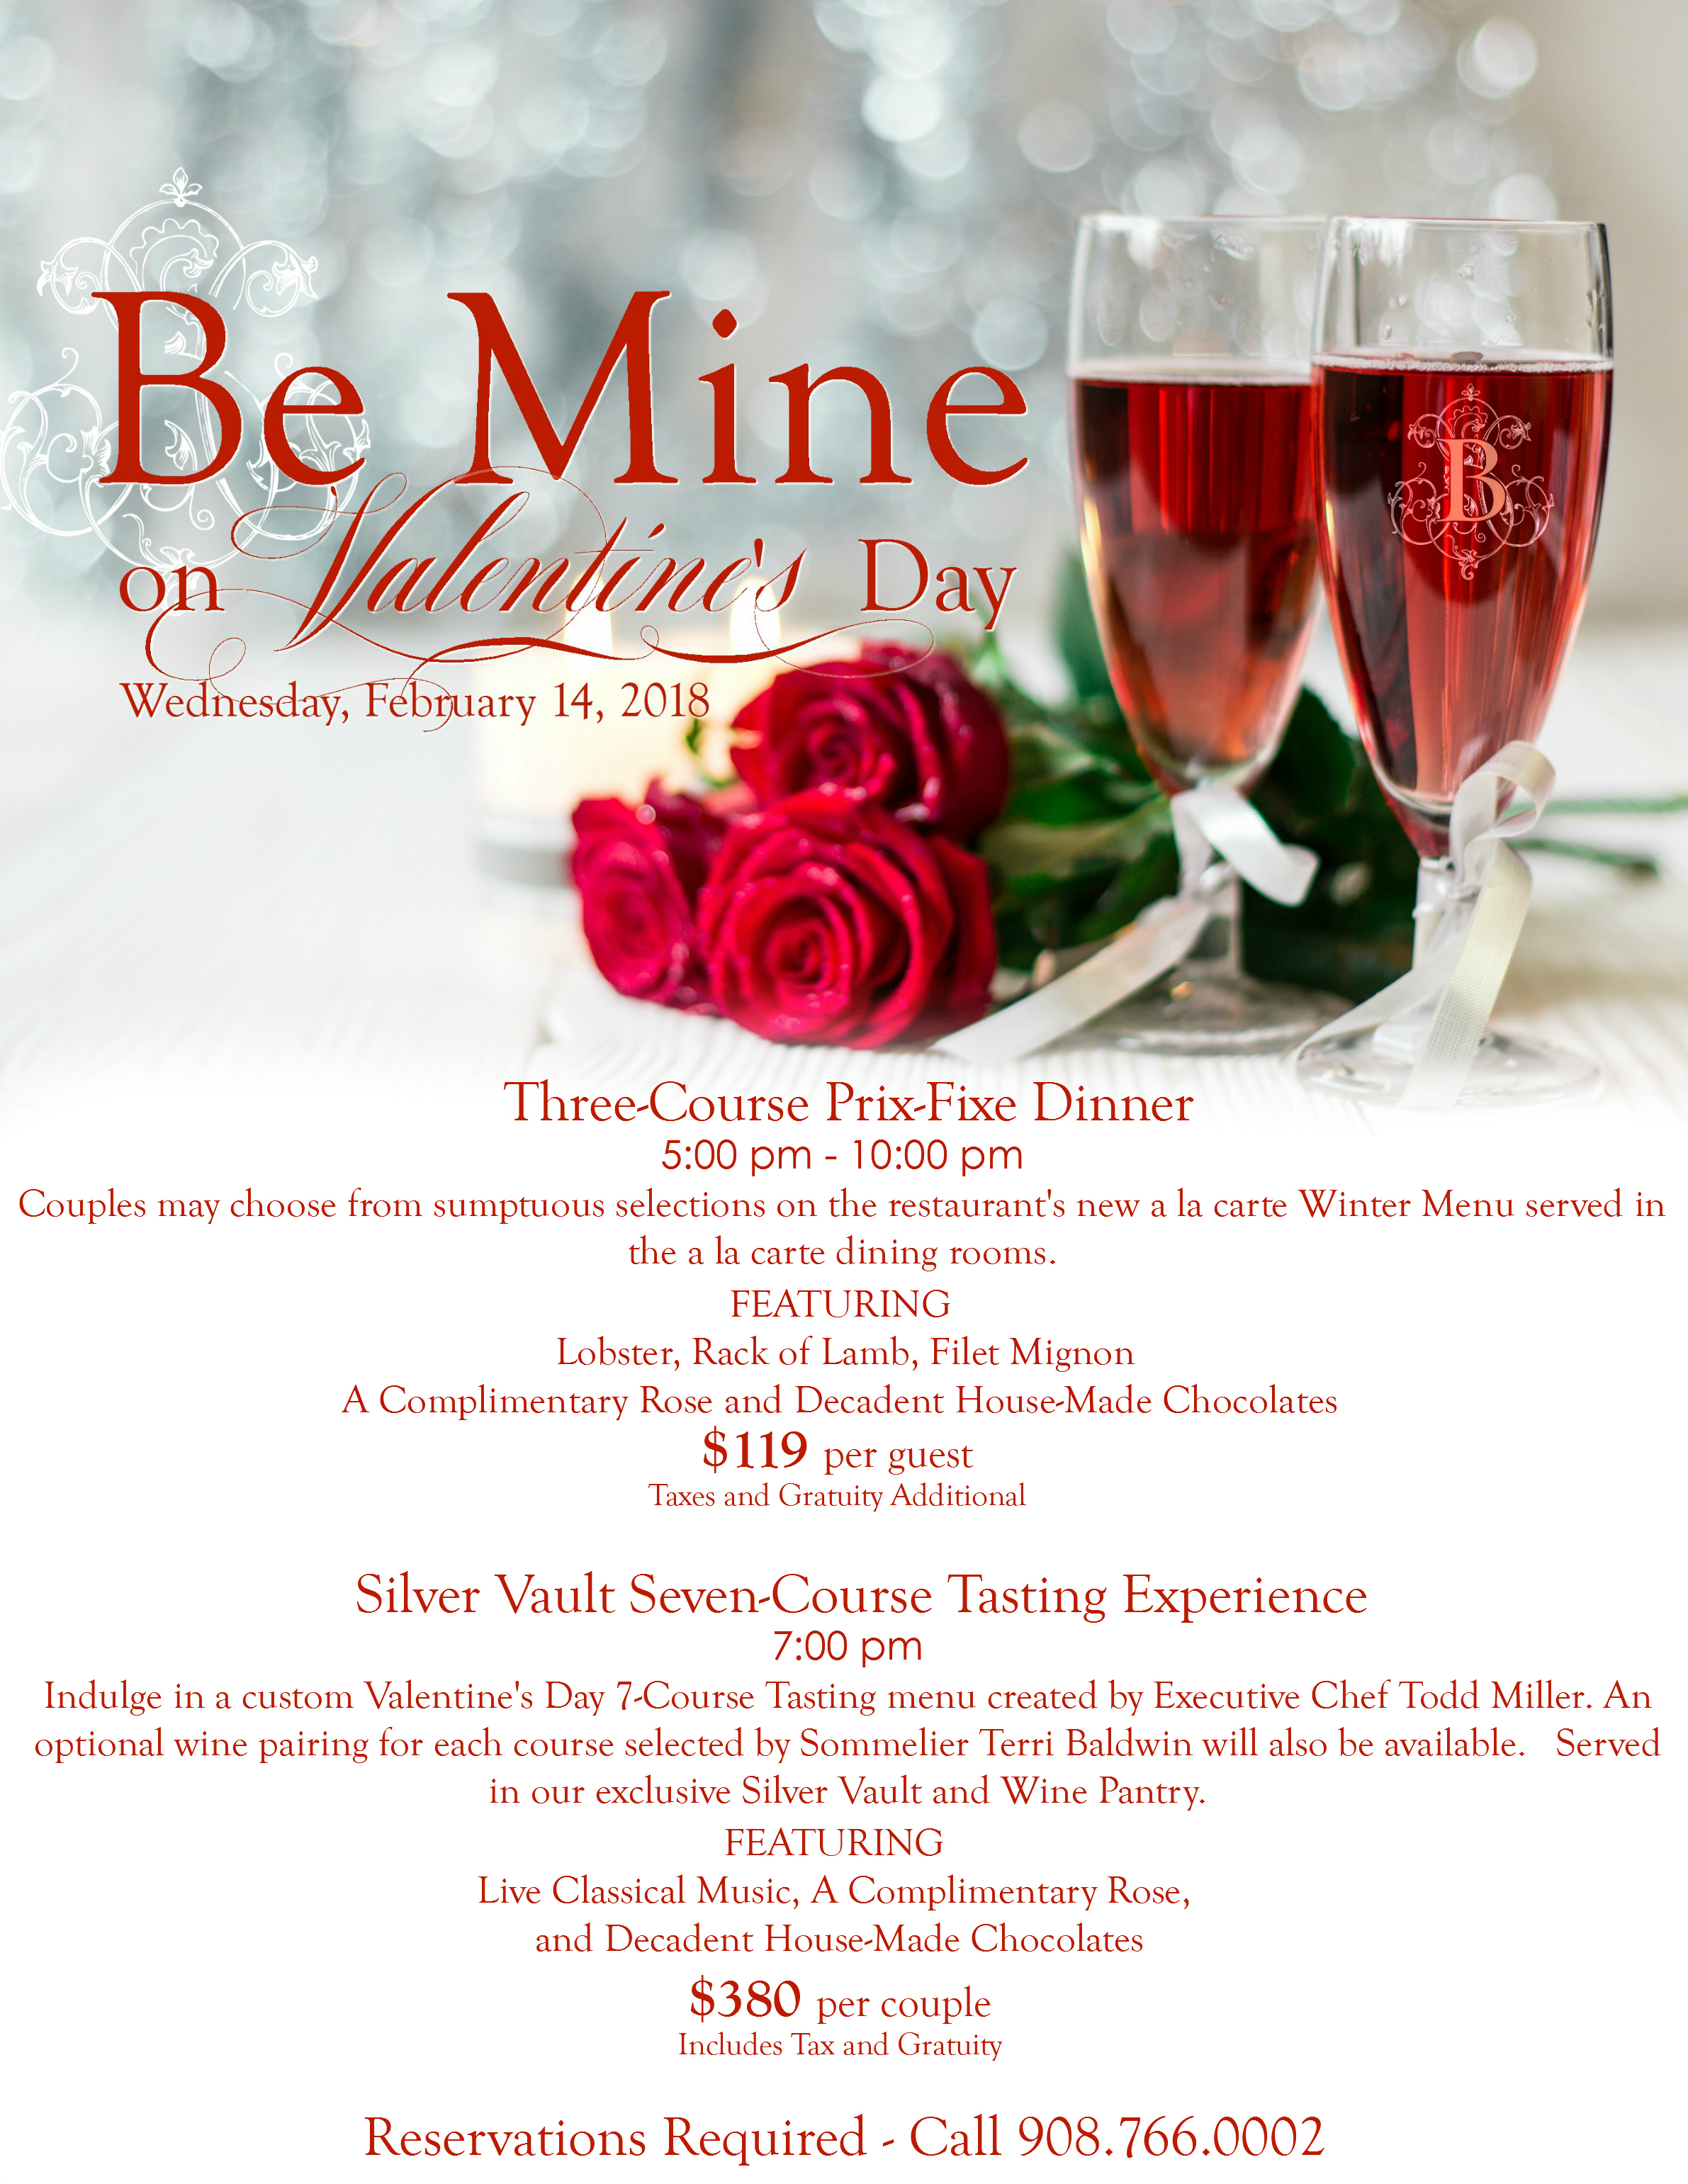 More To Love On Valentine's Day At The Bernards Inn2382 x 3082